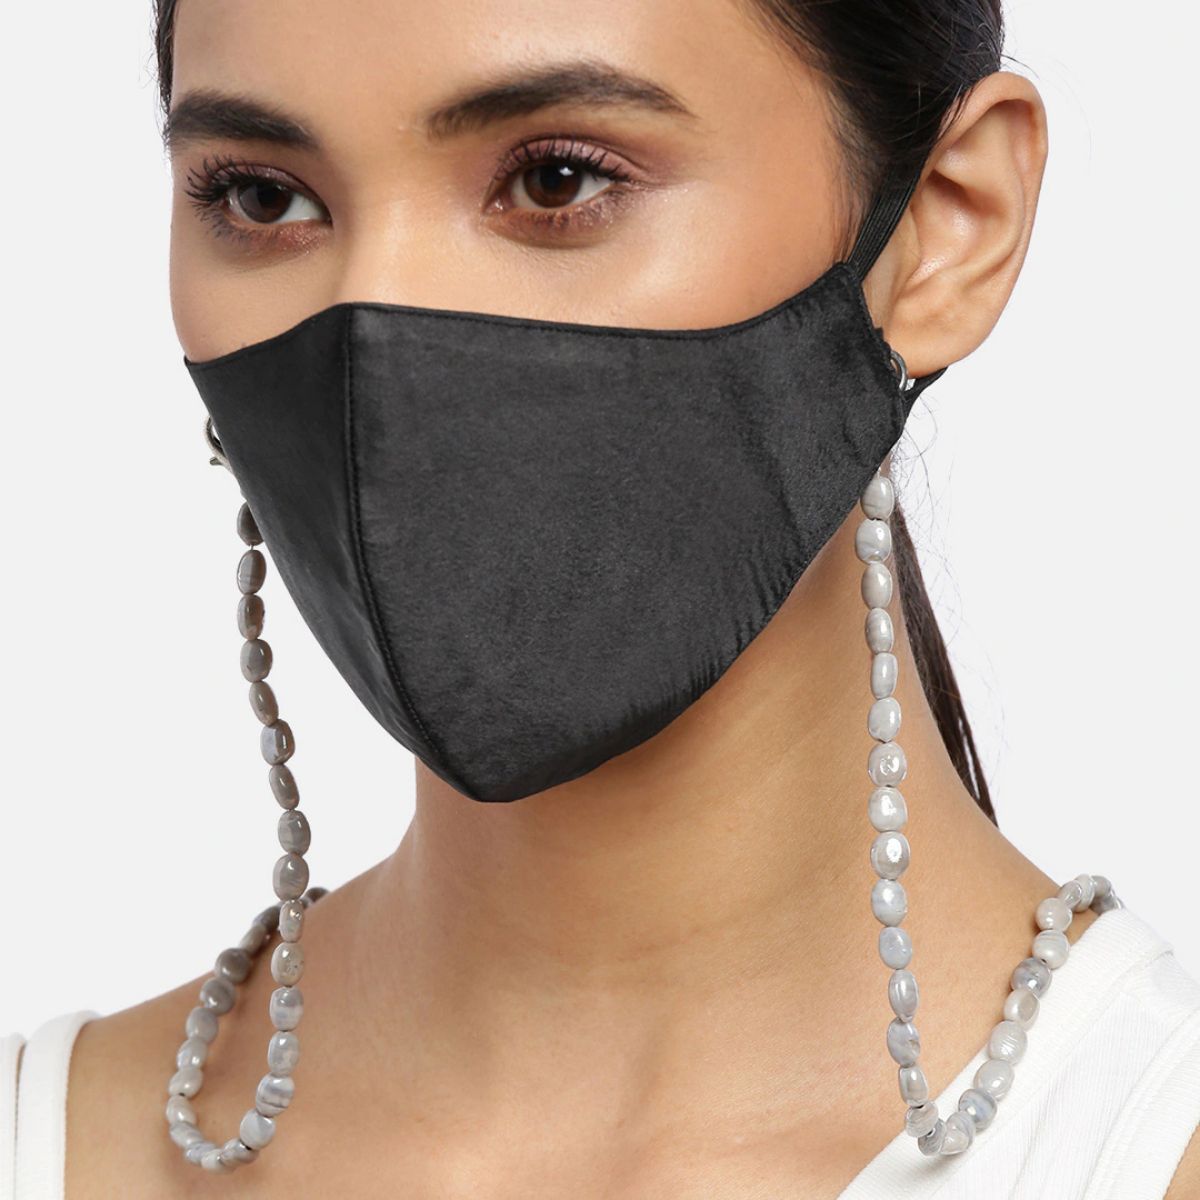 Blueberry Black Reusable 2-Ply Satin Face Mask With Grey Beaded Chain